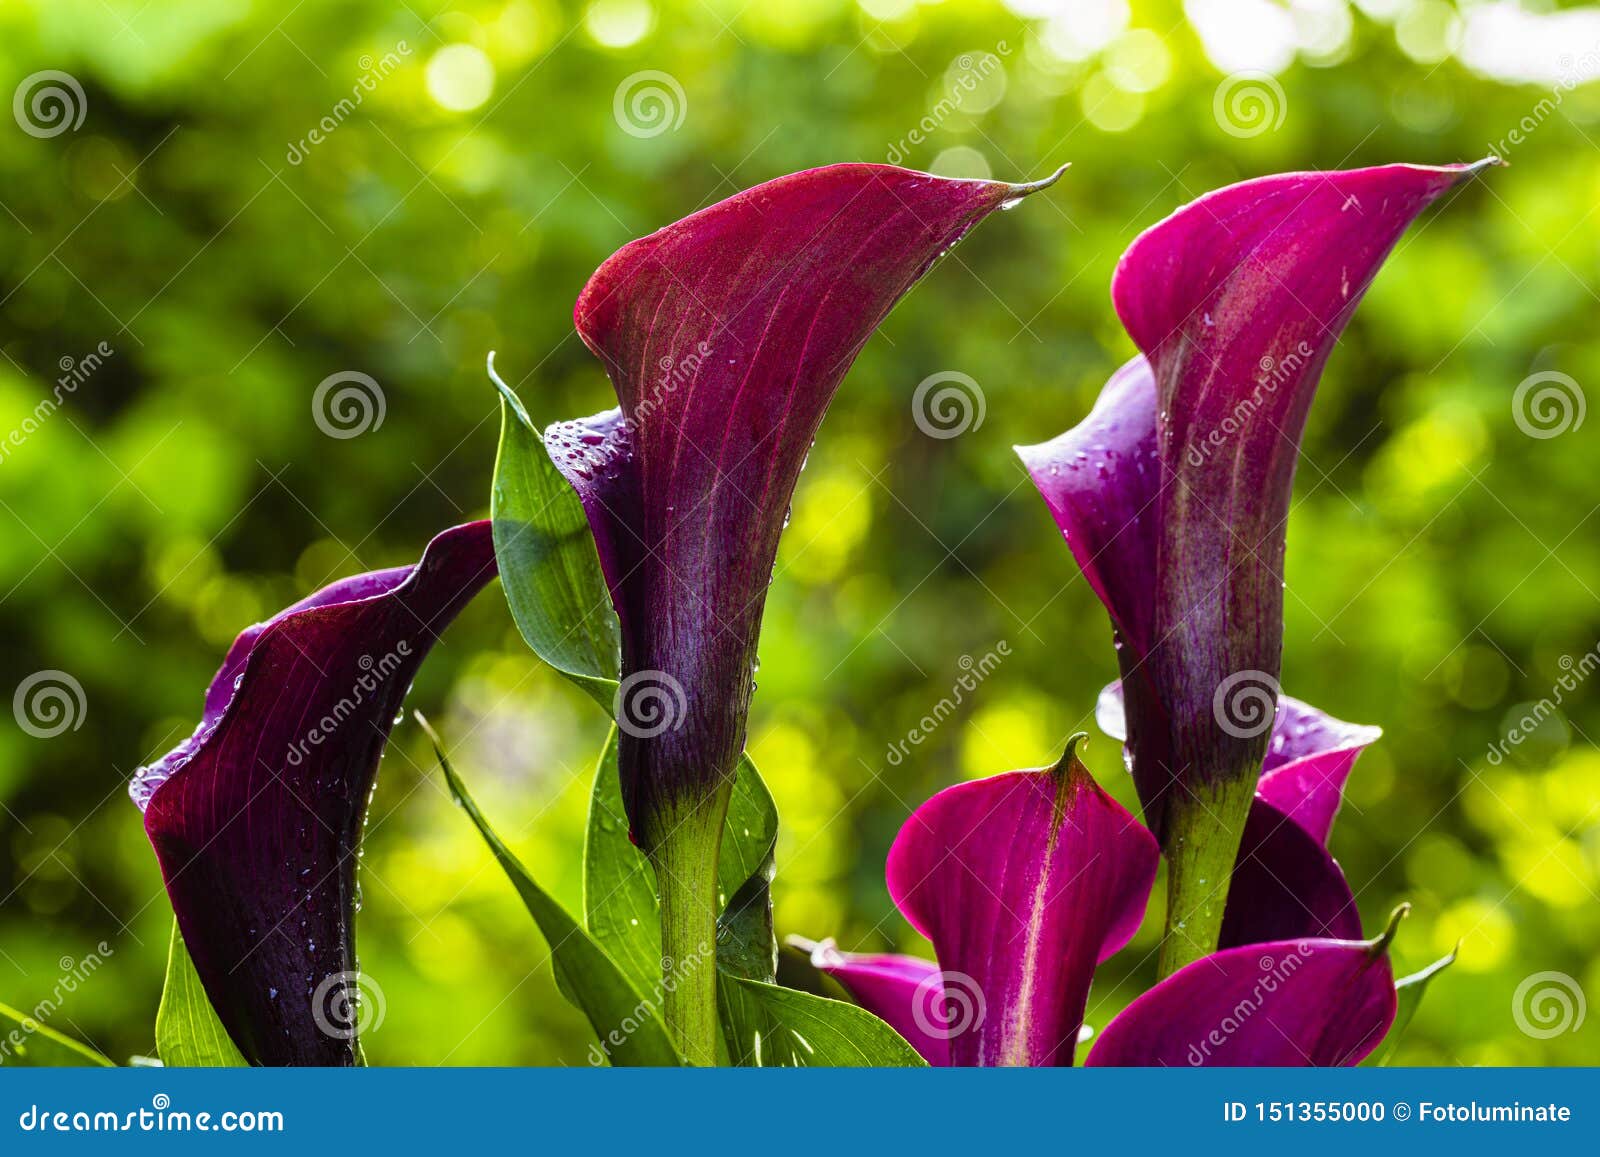 Purple Calla Lily Flower stock photo. Image of lily - 151355000